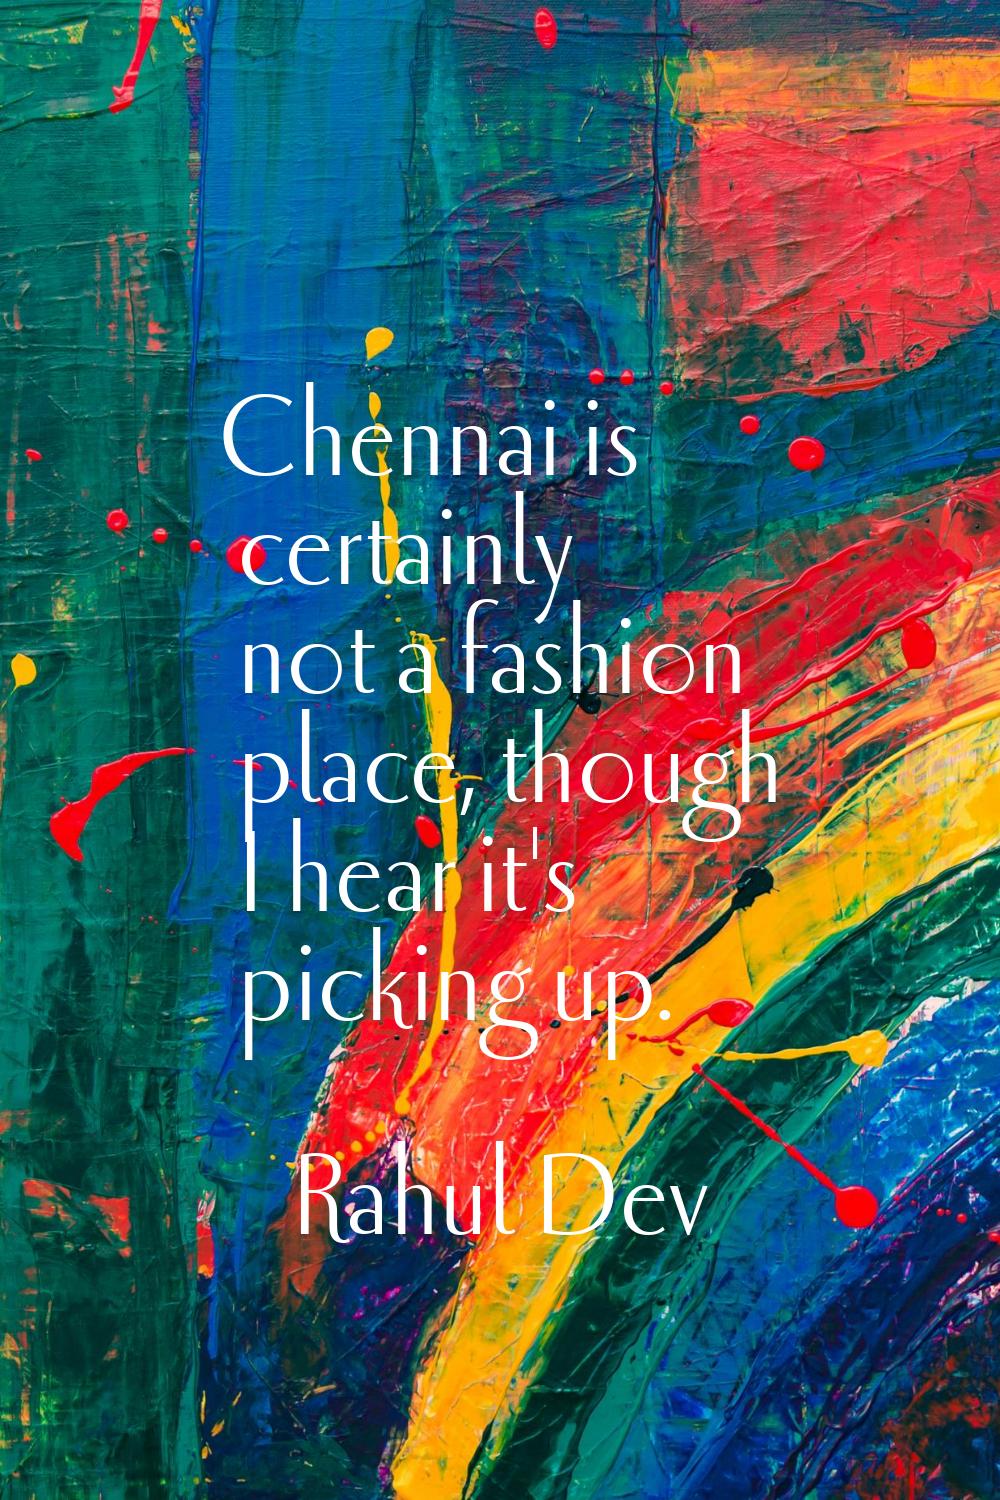 Chennai is certainly not a fashion place, though I hear it's picking up.